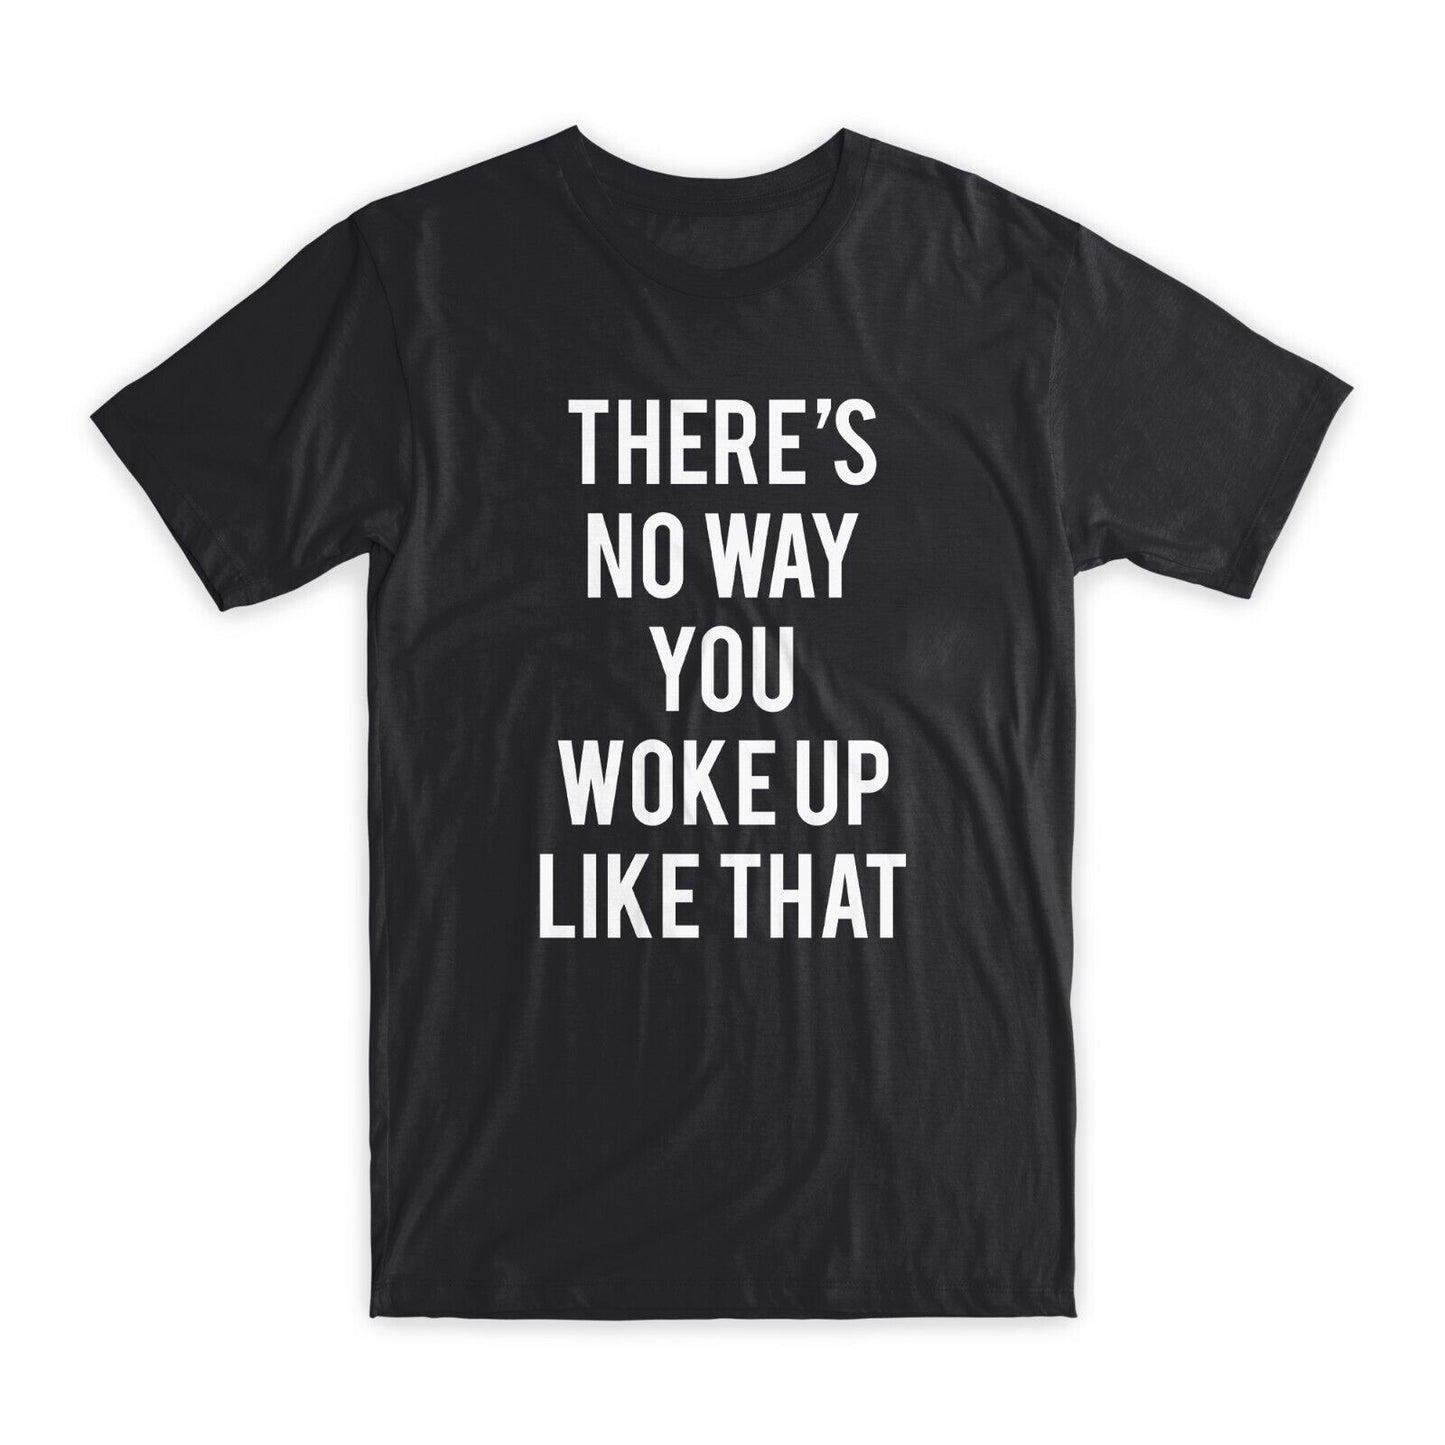 There's No Way You Woke Up Like That T-Shirt Premium Cotton Funny Tees Gift NEW